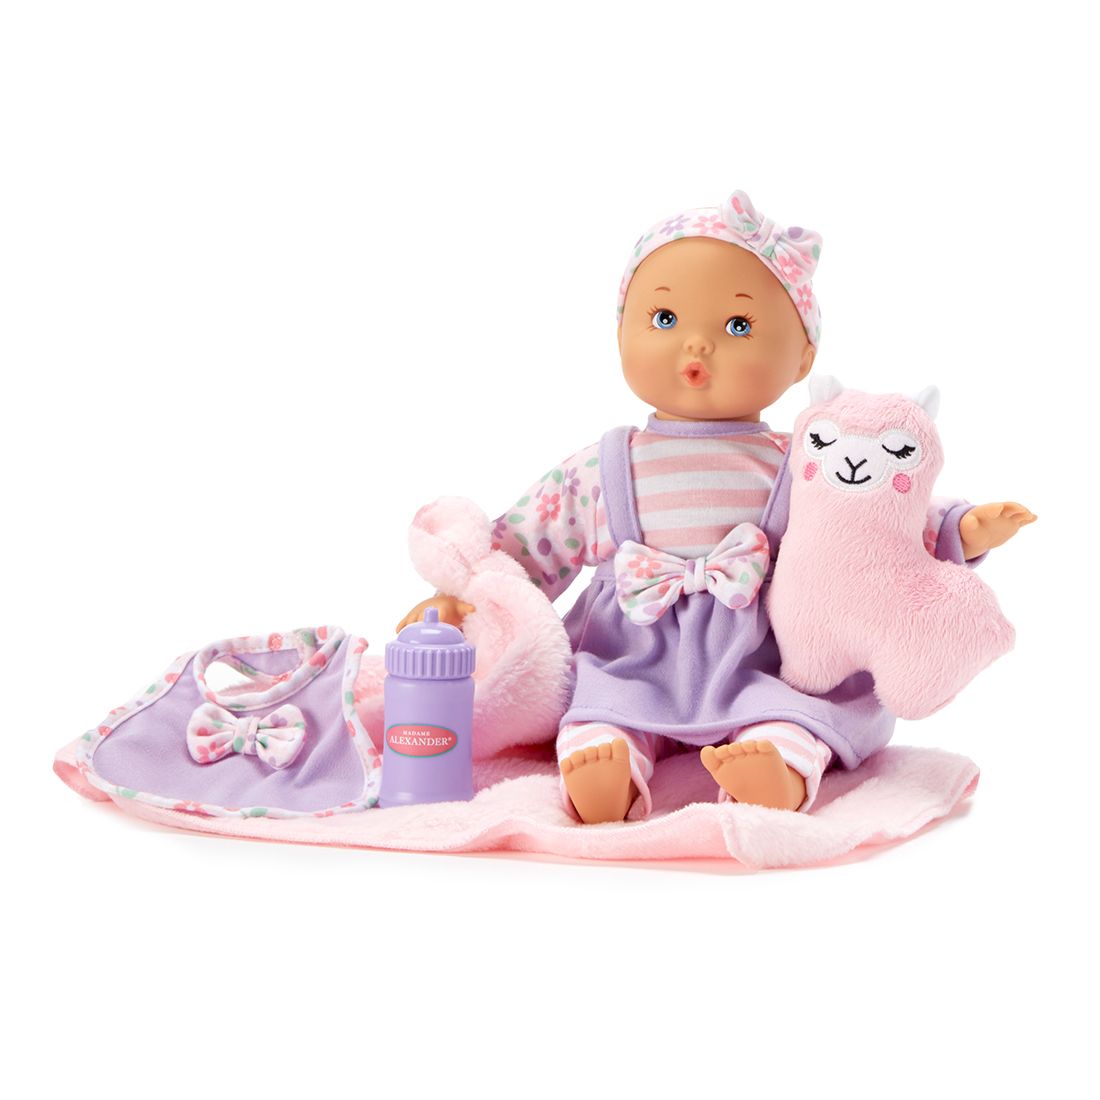 Adorable Stuff Baby Doll Toy